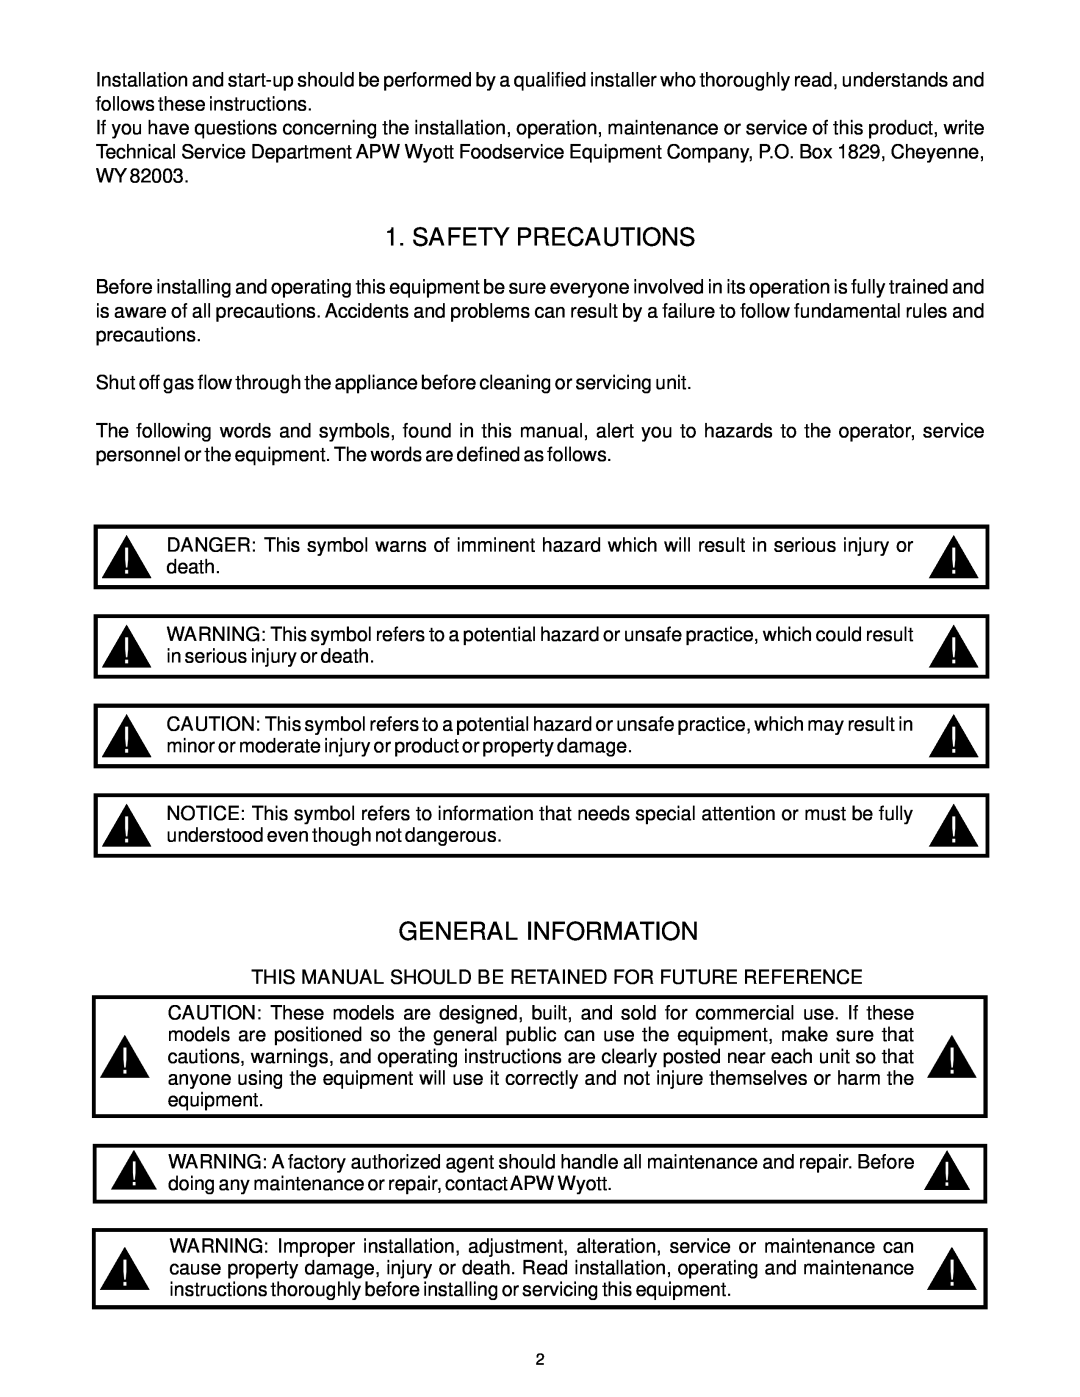 APW Wyott GHP-2H Safety Precautions, General Information, This Manual Should Be Retained For Future Reference 